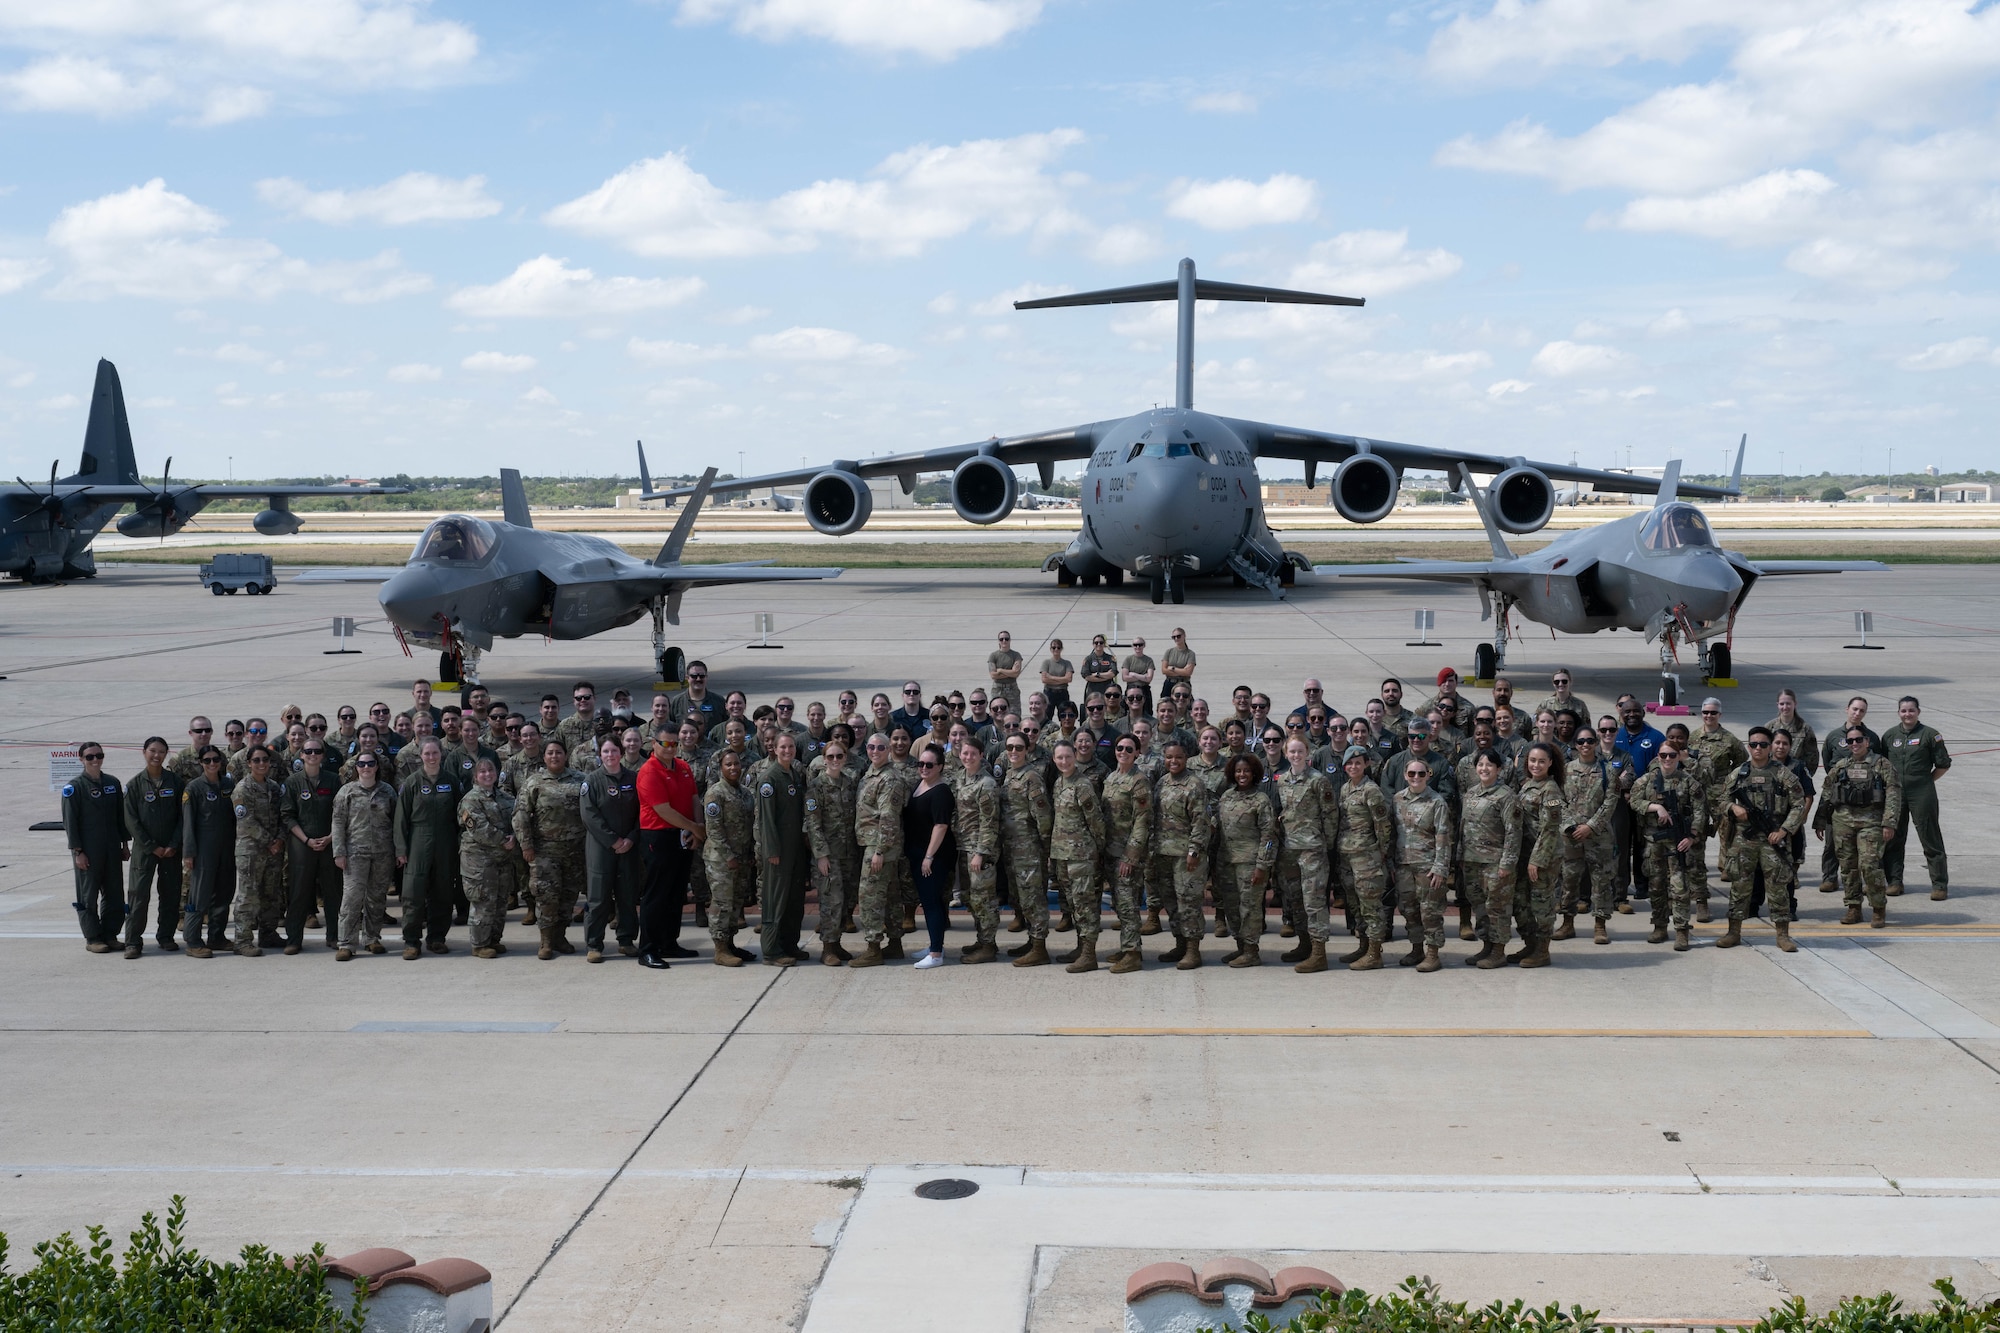 Members across the Air Education and Training command who helped coordinate and execute Girls in Aviation celebration pose for a group photo, Kelly Field, Joint Base San Antonio-Lackland, Texas, Sept. 21, 2023. About 400 local students attended the Girls in Aviation celebration, which showcased women from across Air Education and Training Command and their aircraft. The women represented various career fields, such as pilots, maintainers and boom operators. (U.S. Air Force photo by Airman 1st Class Gabriel Jones)